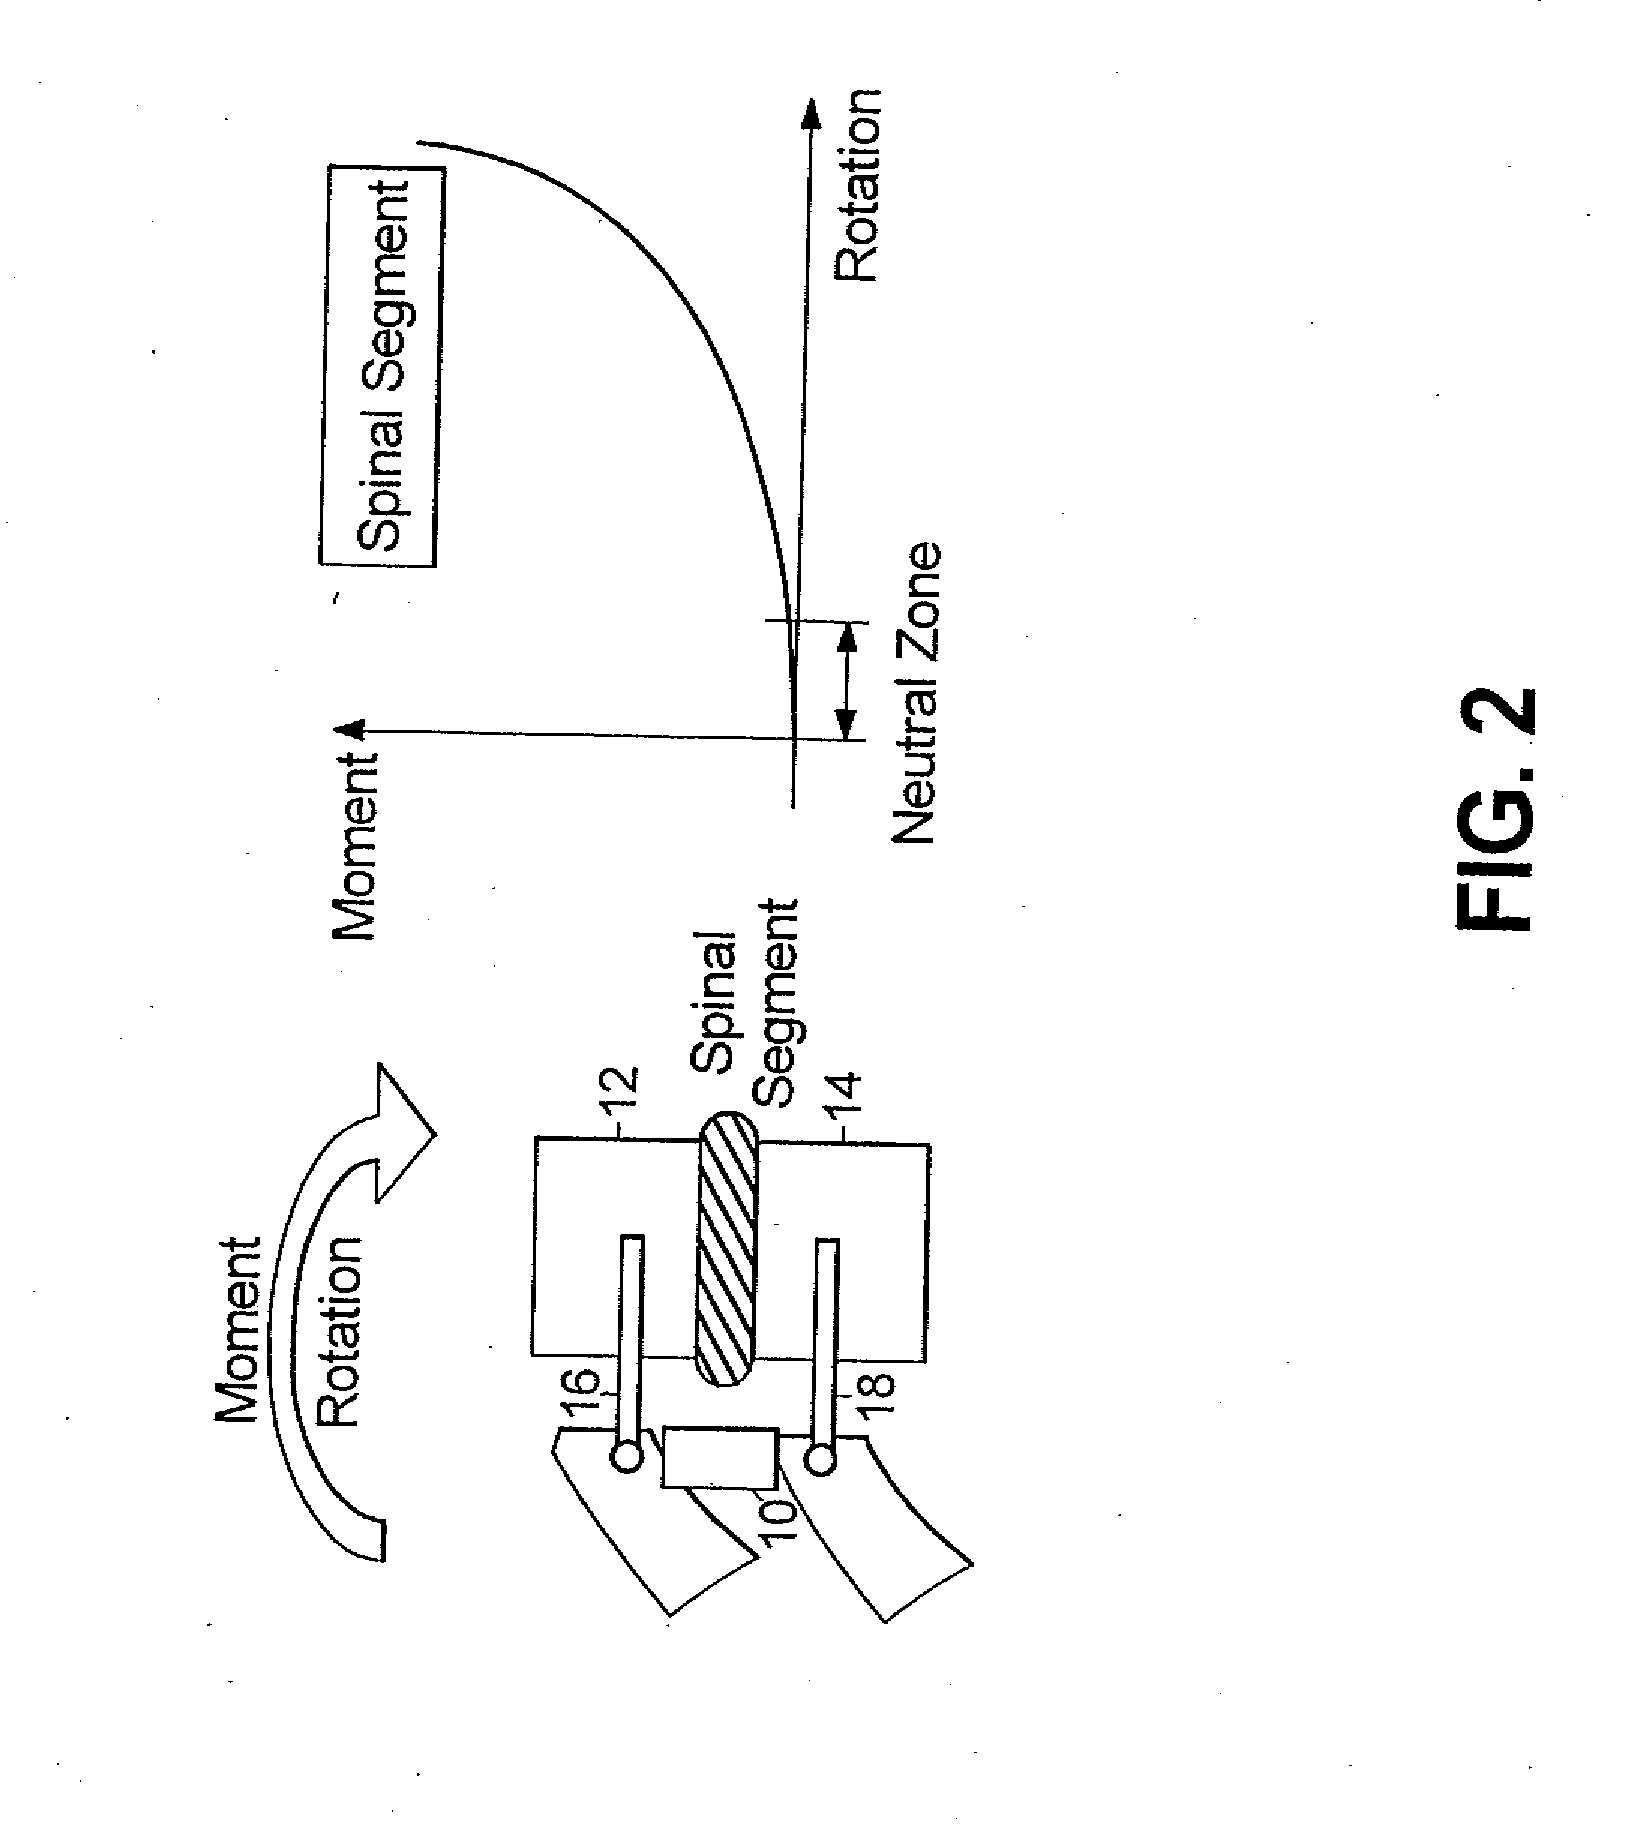 Method for stabilizing a spinal segment